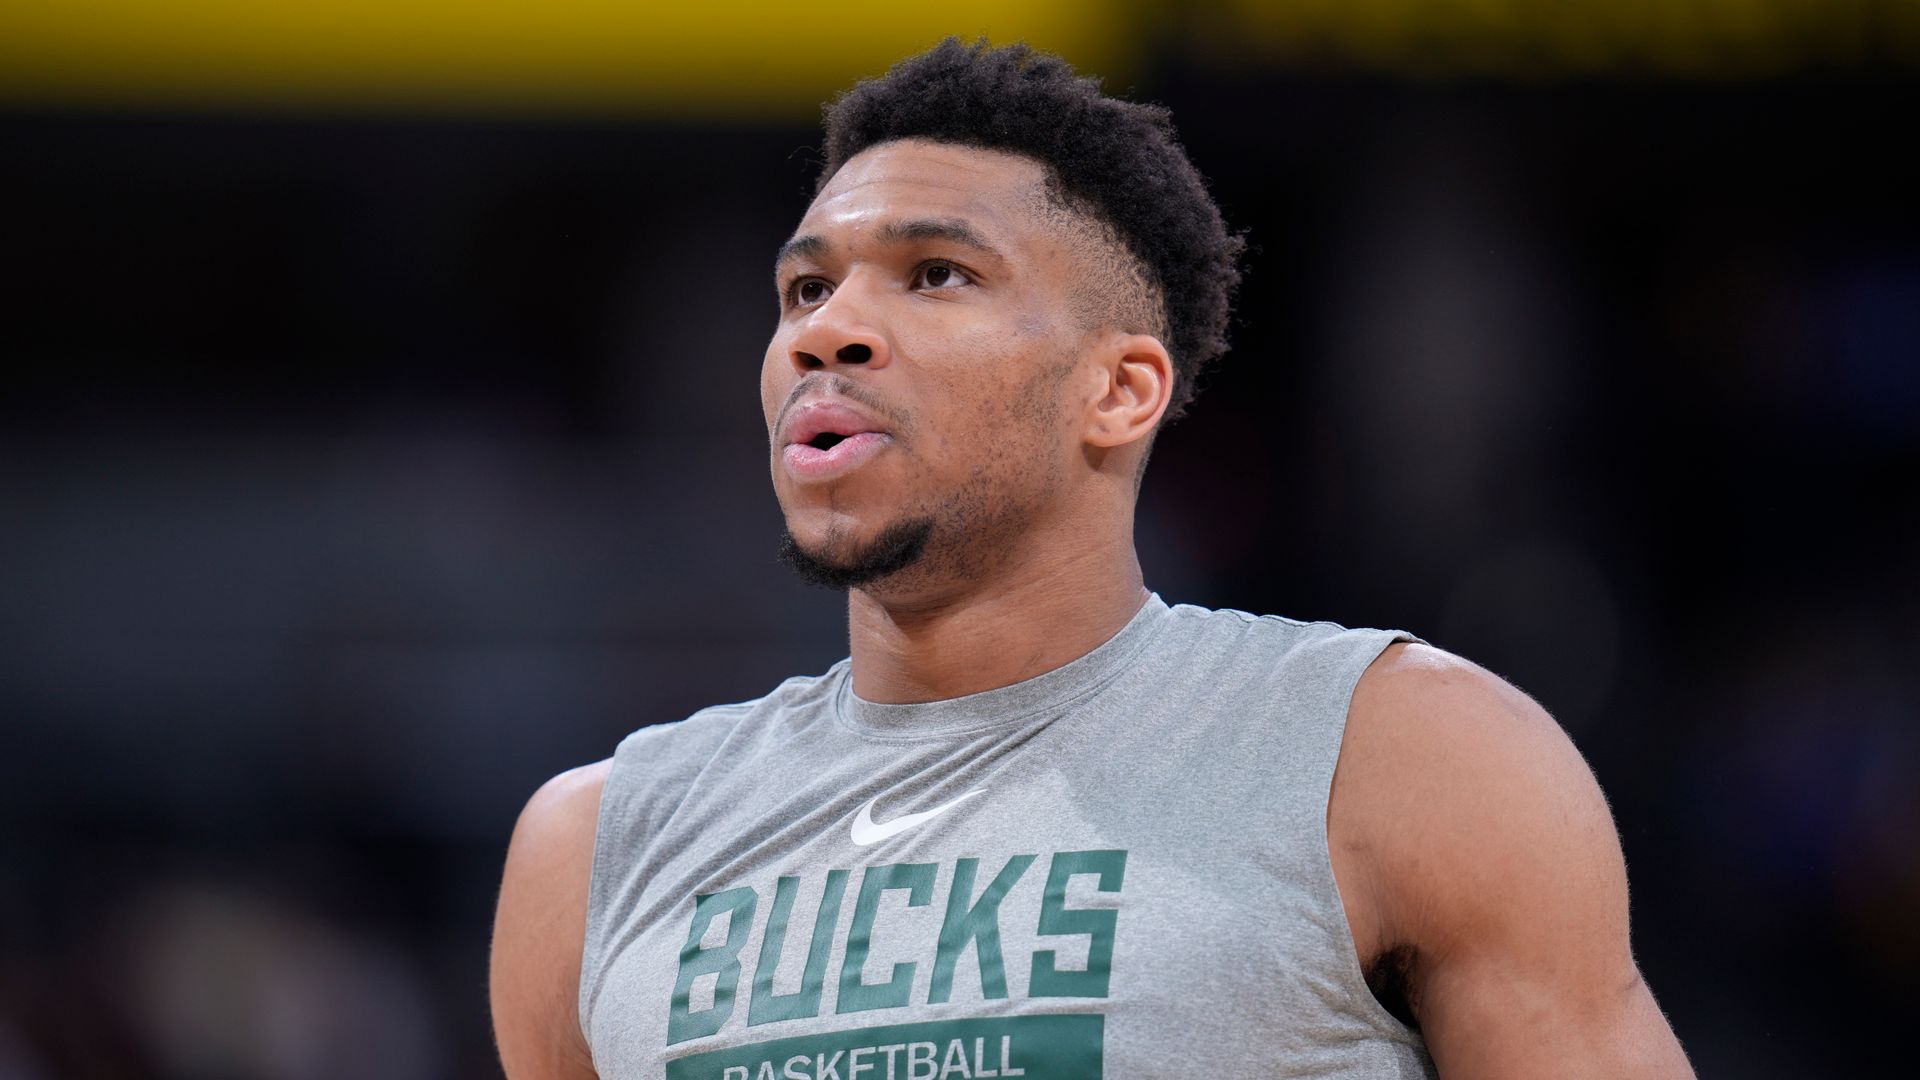 'There's no failure in sports' - Giannis defends Bucks after playoff exit